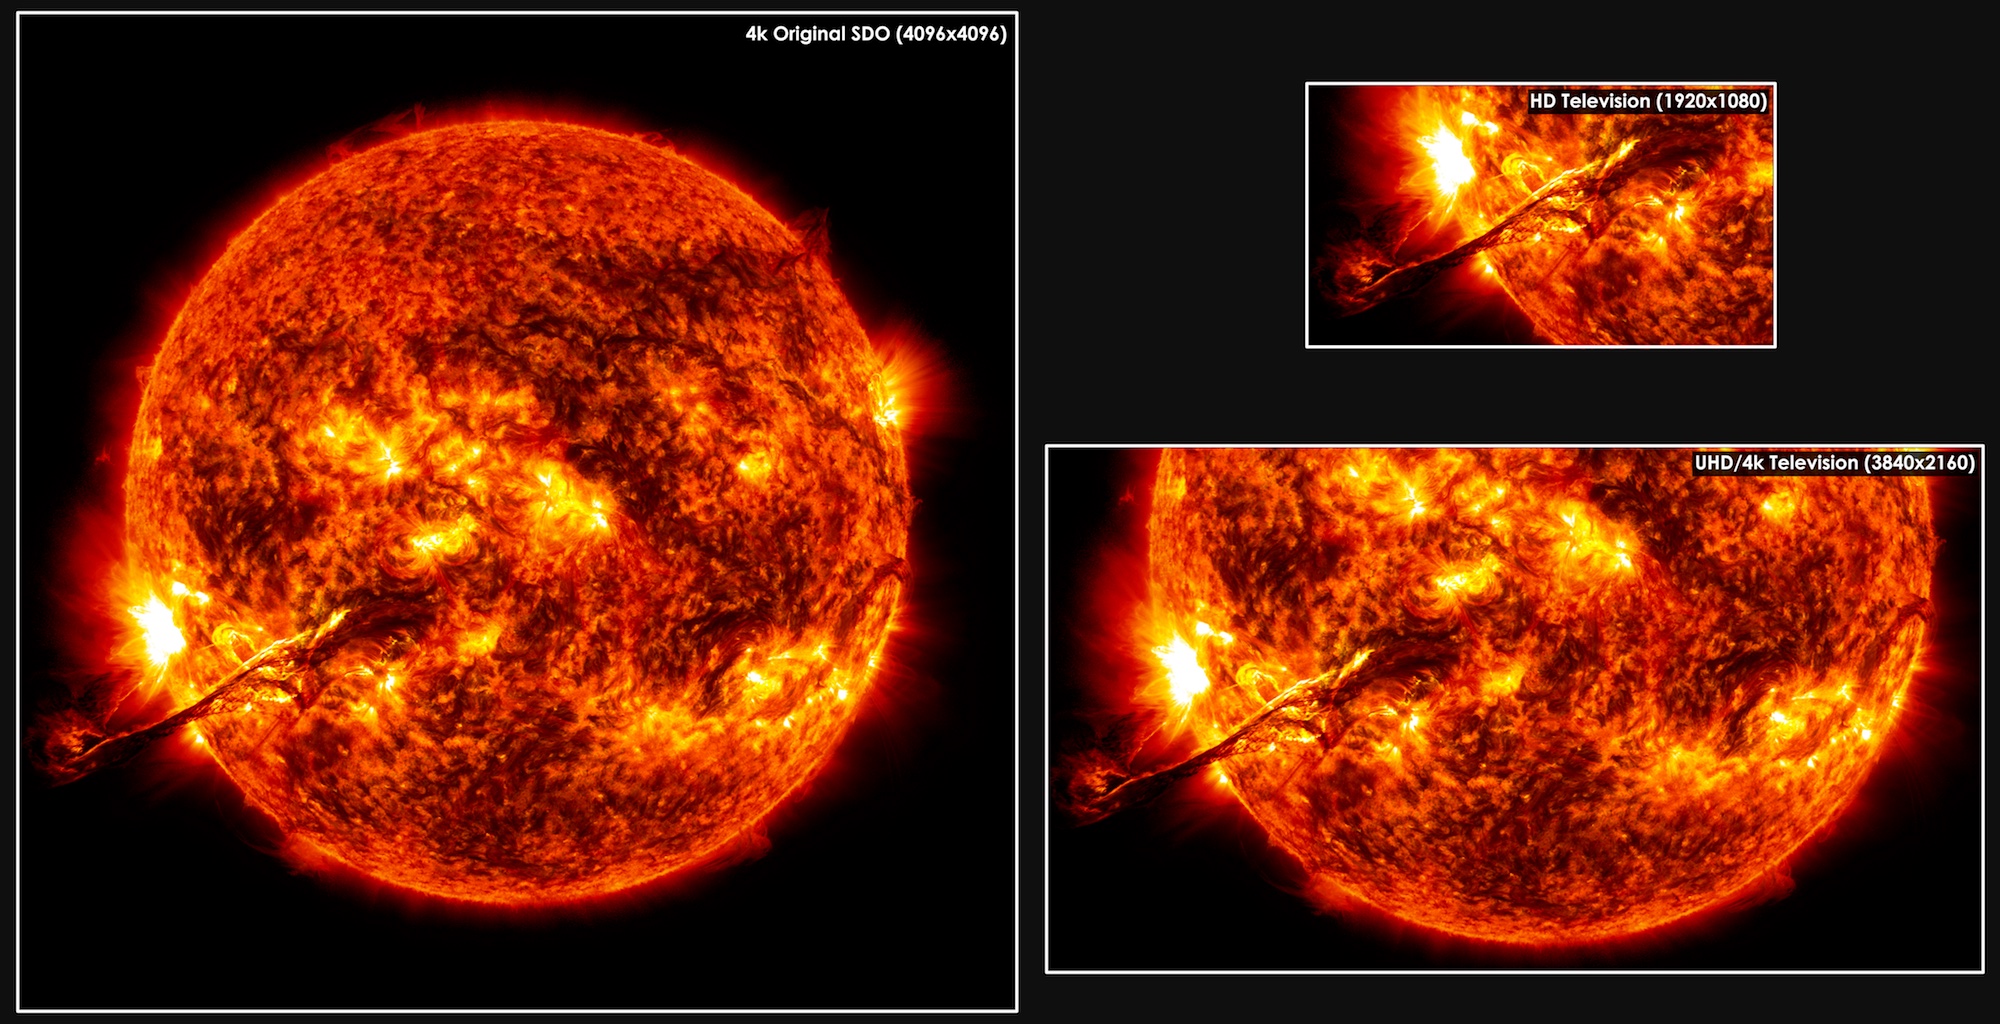 At one pixel captured to one pixel displayed, UHD and 1080 can only show part of the the overall image made by SDO in ten different wavelengths every 12 seconds.